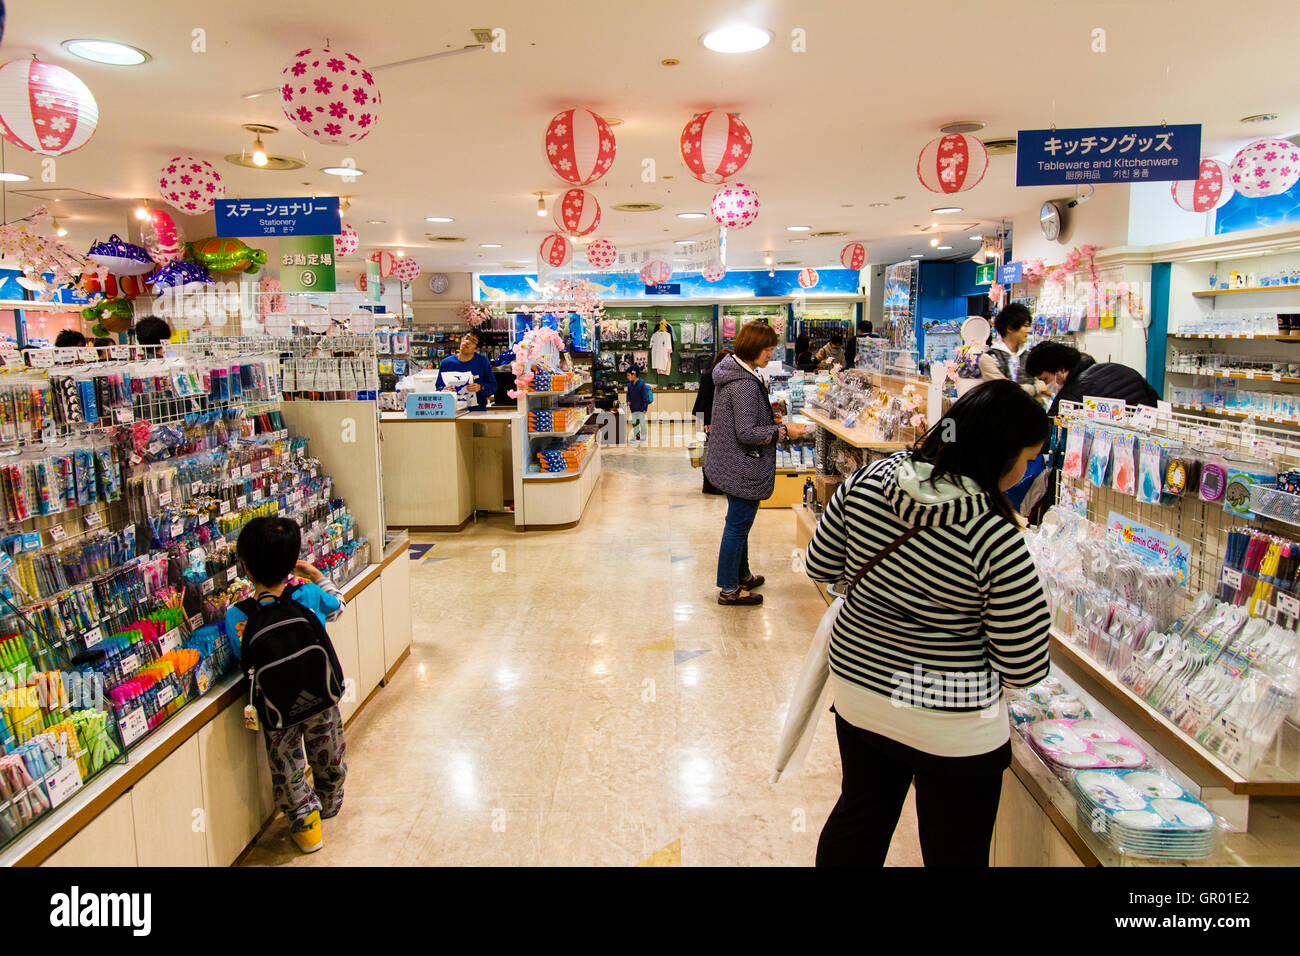 Interior of the gift shop at the Osaka Aquarium, Kaiyukan. View along two display stands with various souvenirs and Japanese women and a child looking. Stock Photo